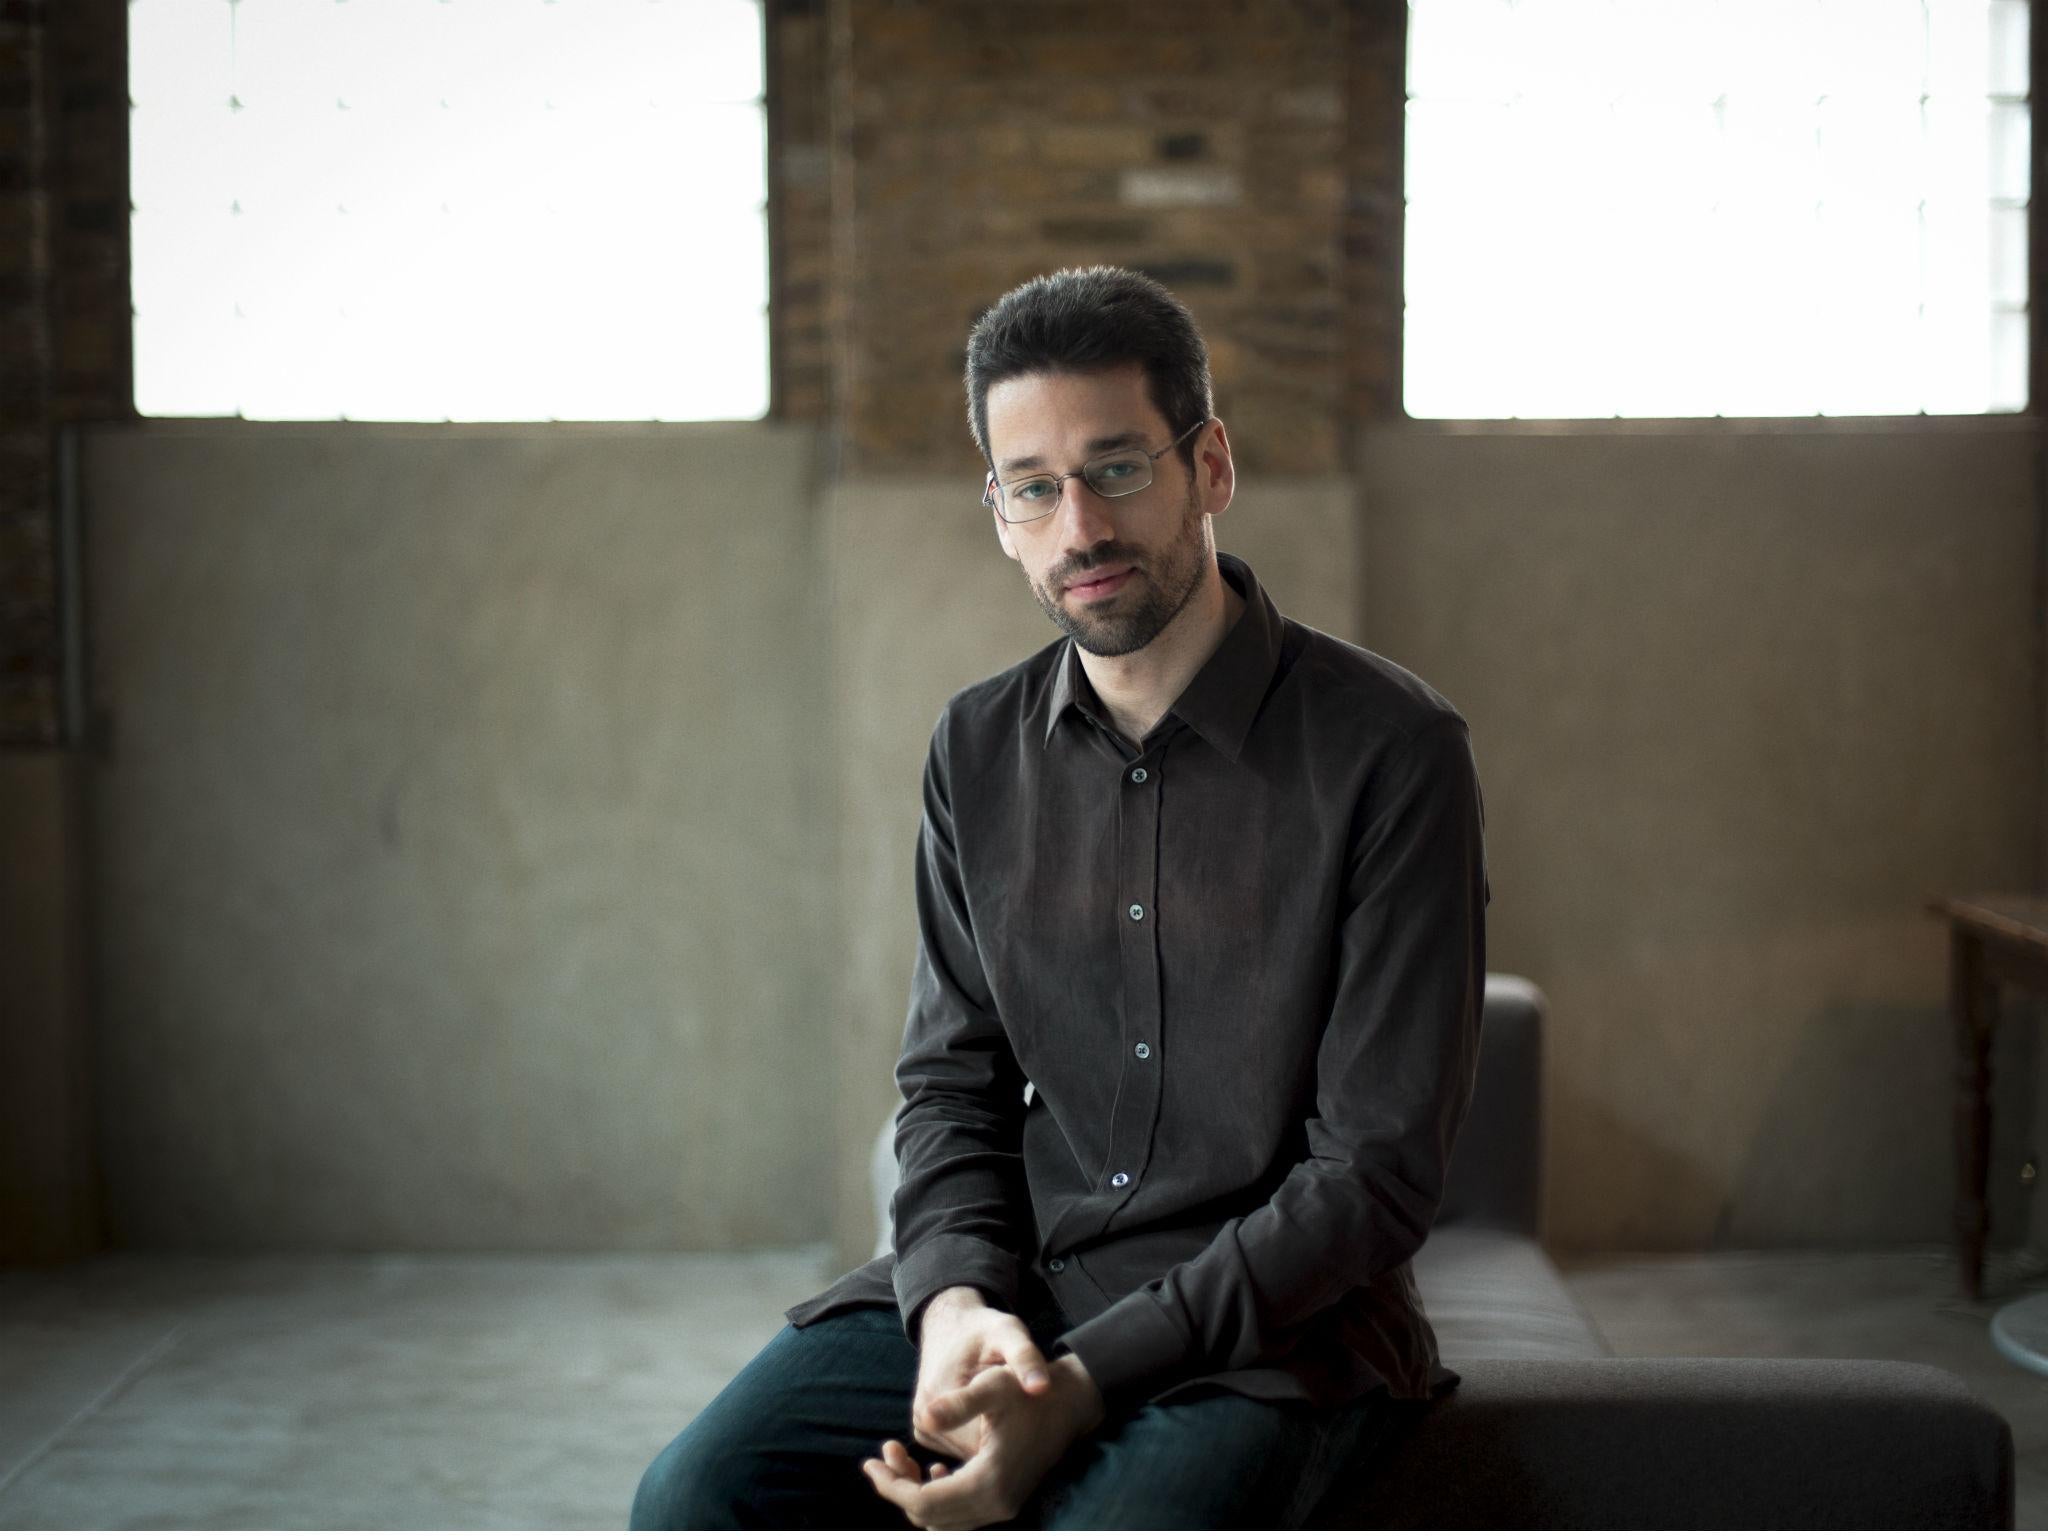 The pianist Jonathan Biss is a true keyboard poet